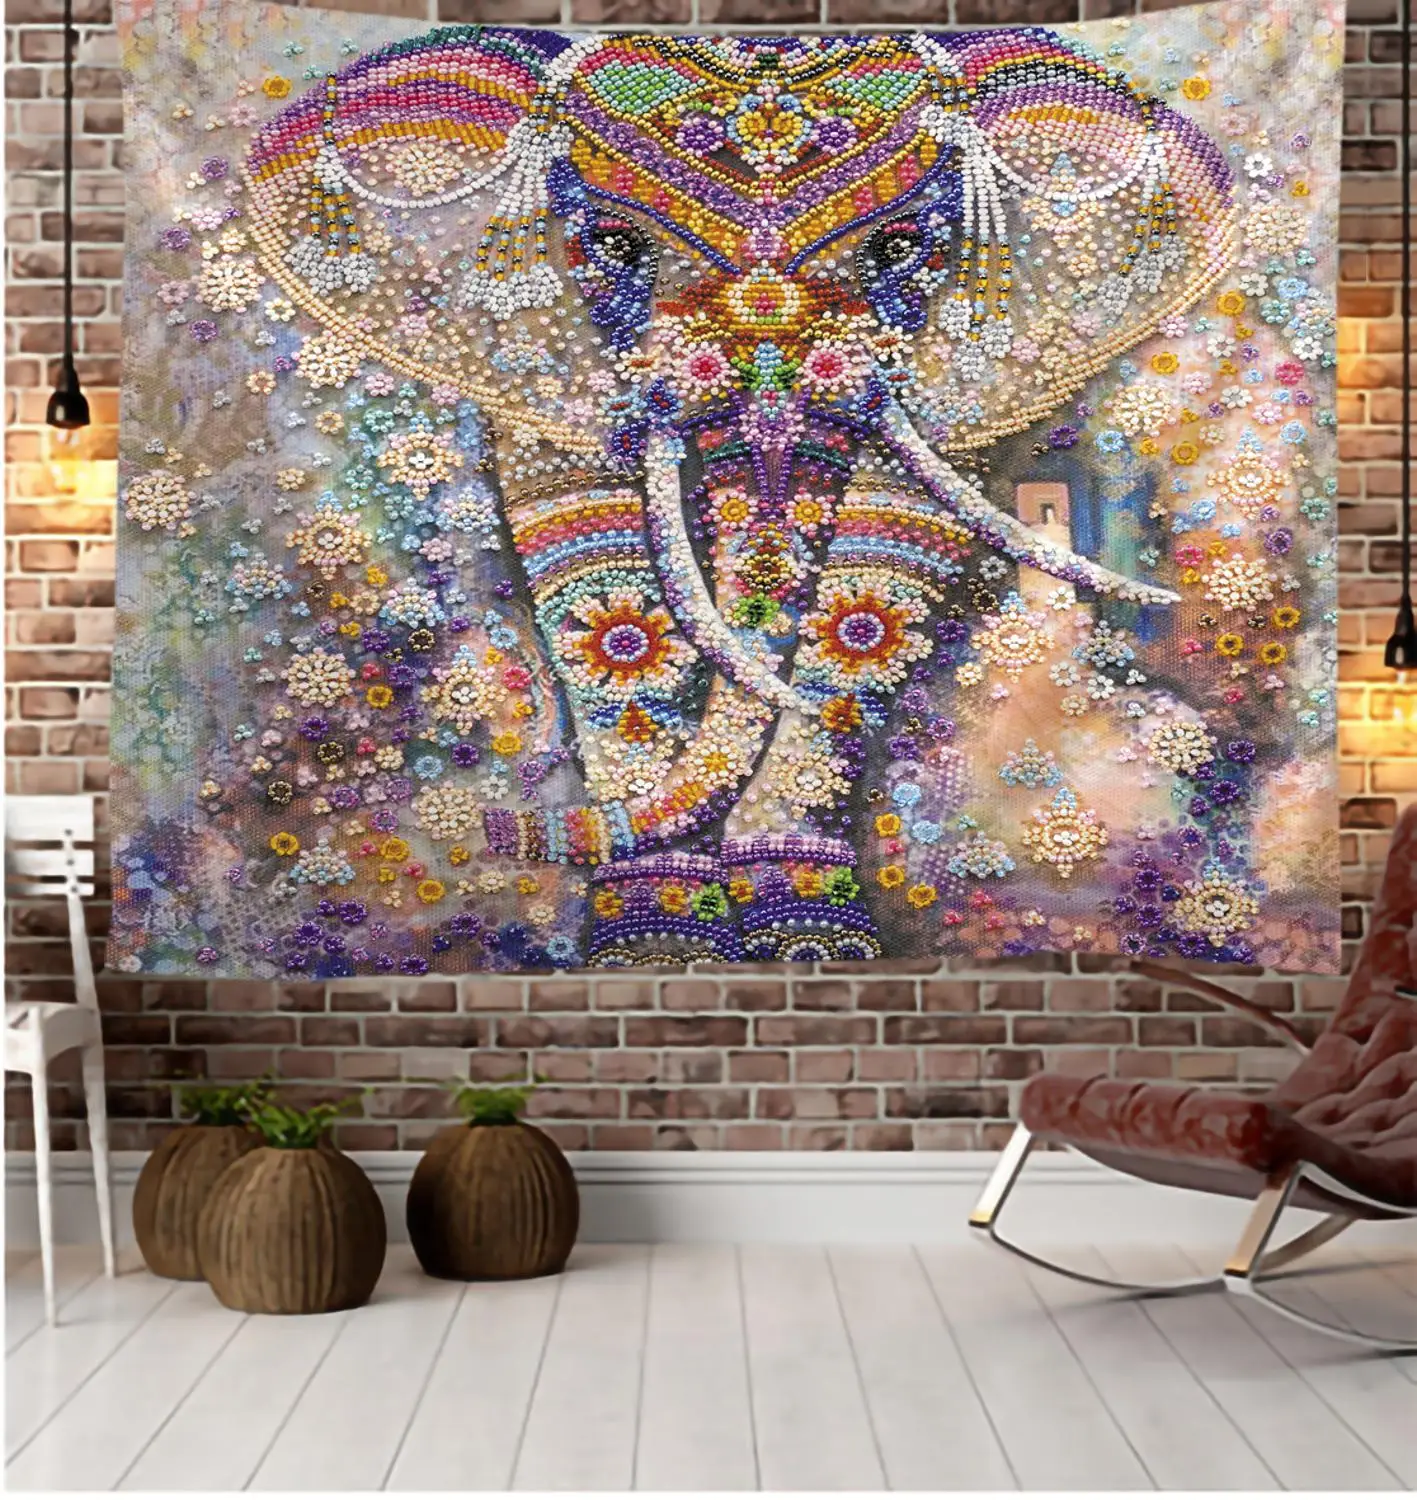 

Elephant Indian Mandala Wall Hanging Bohemian Gypsy Psychedelic Tapiz Witchcraft Tapestry